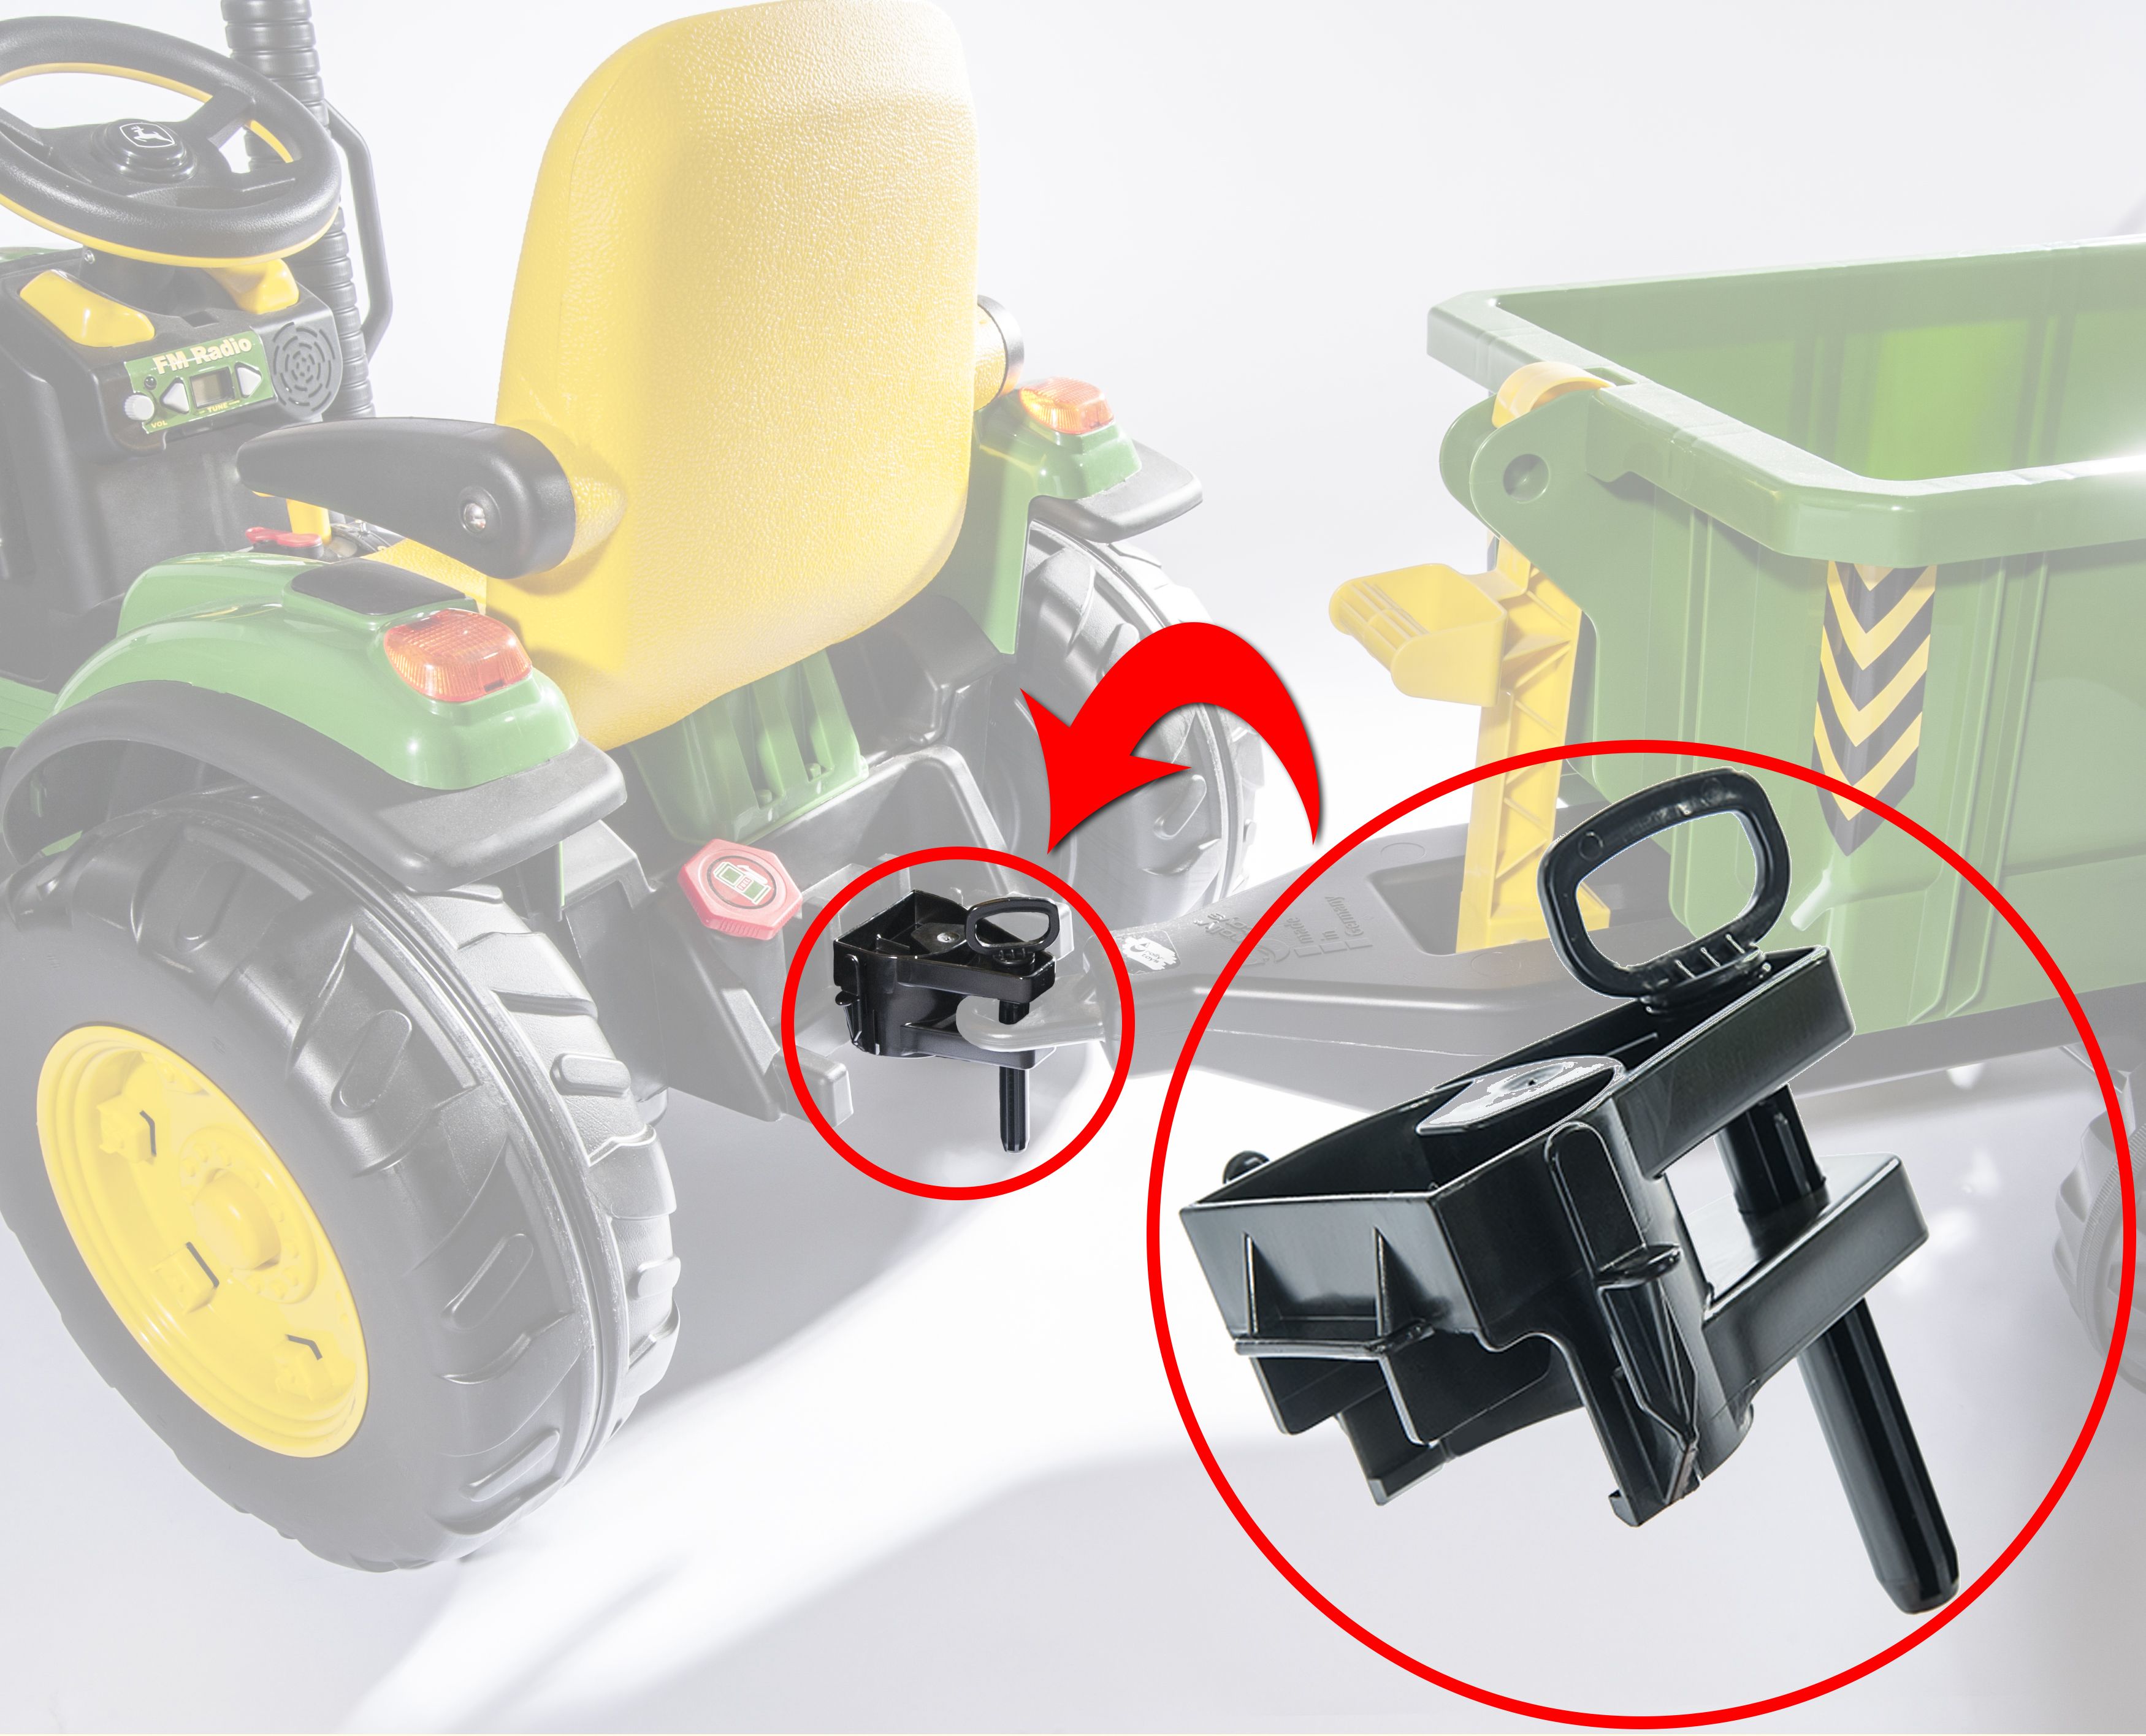 Nathaniel Ward goud opstelling rolly toys adapter compatible with Peg Perego tractors